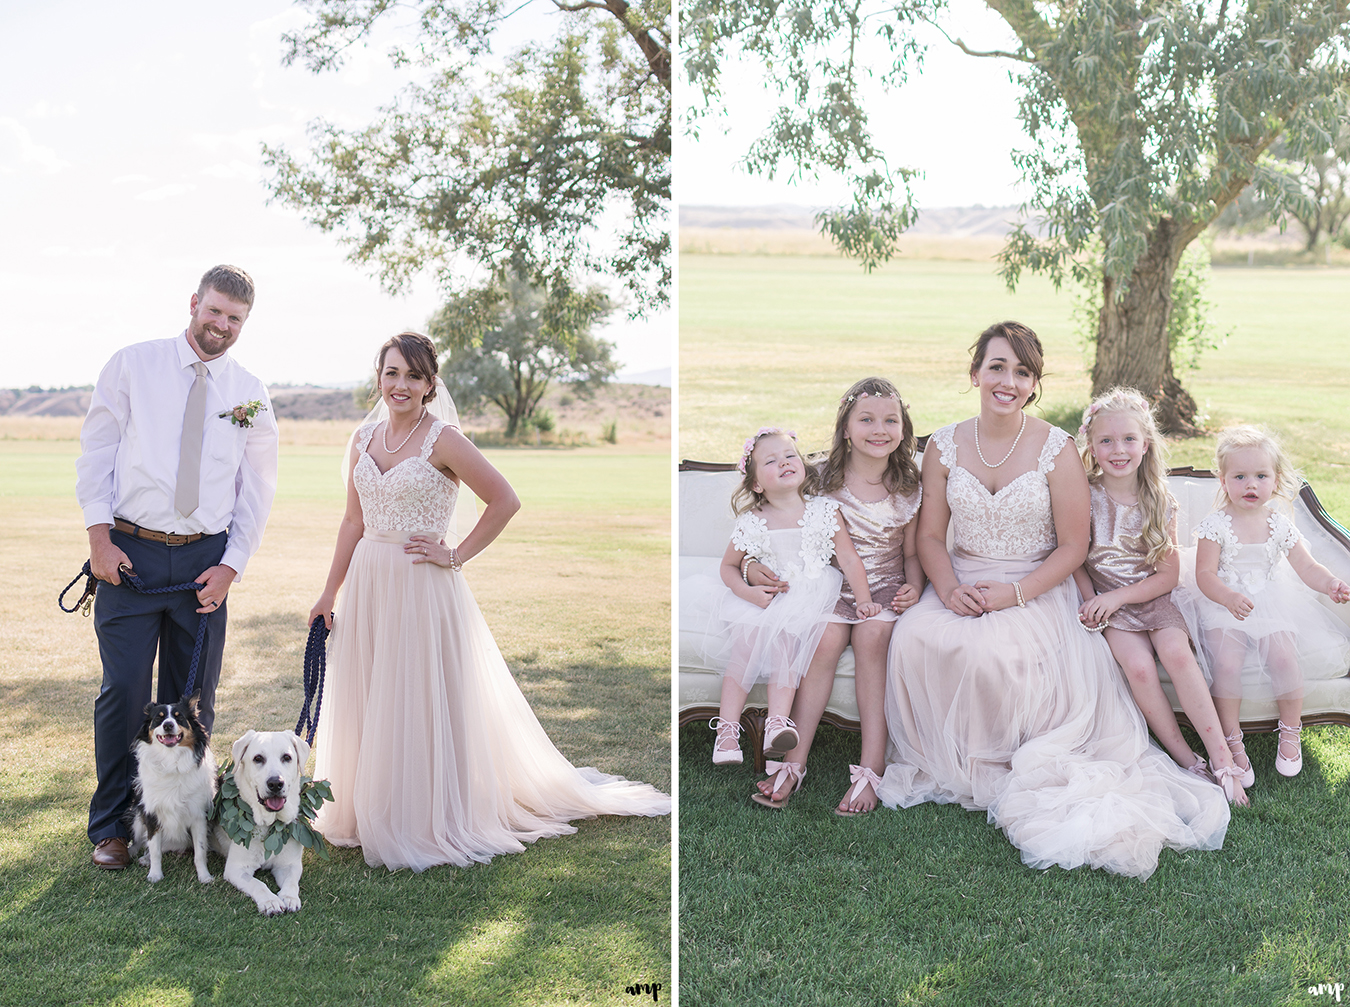 Bridal party flower girls and dogs